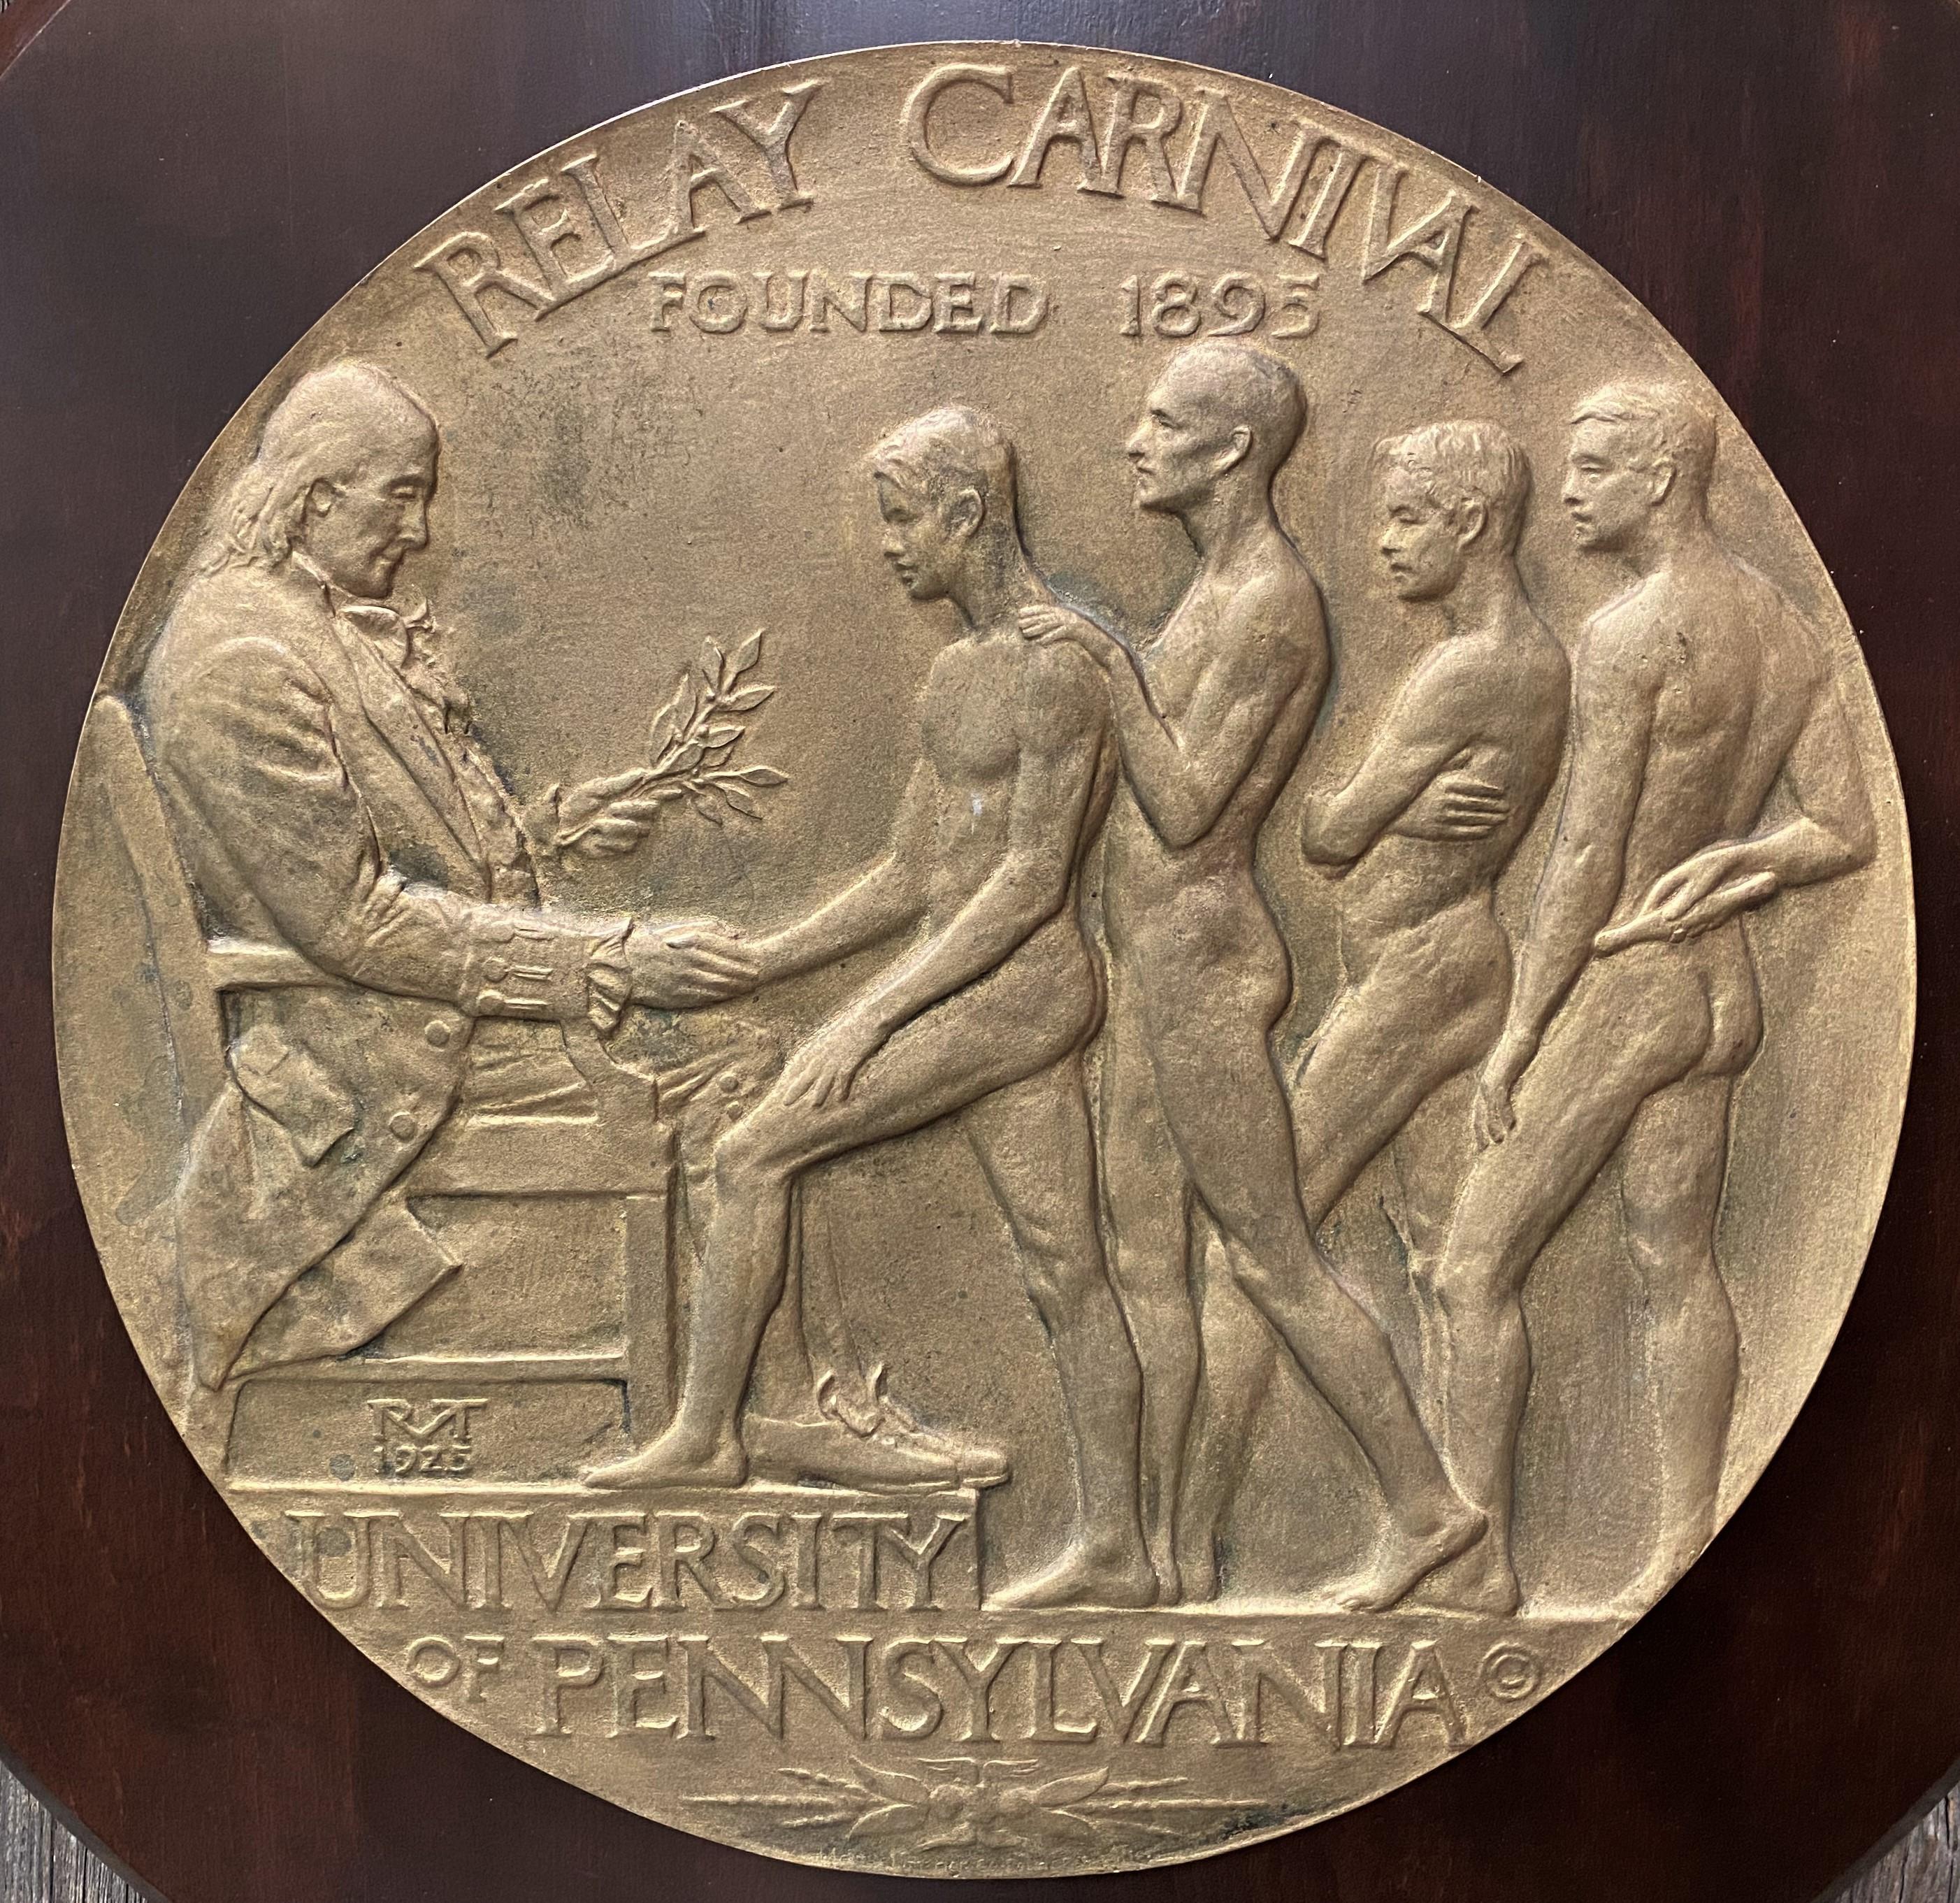 Relay Carnival at the University of Pennsylvania, 1925 - Sculpture by Robert Tait McKenzie